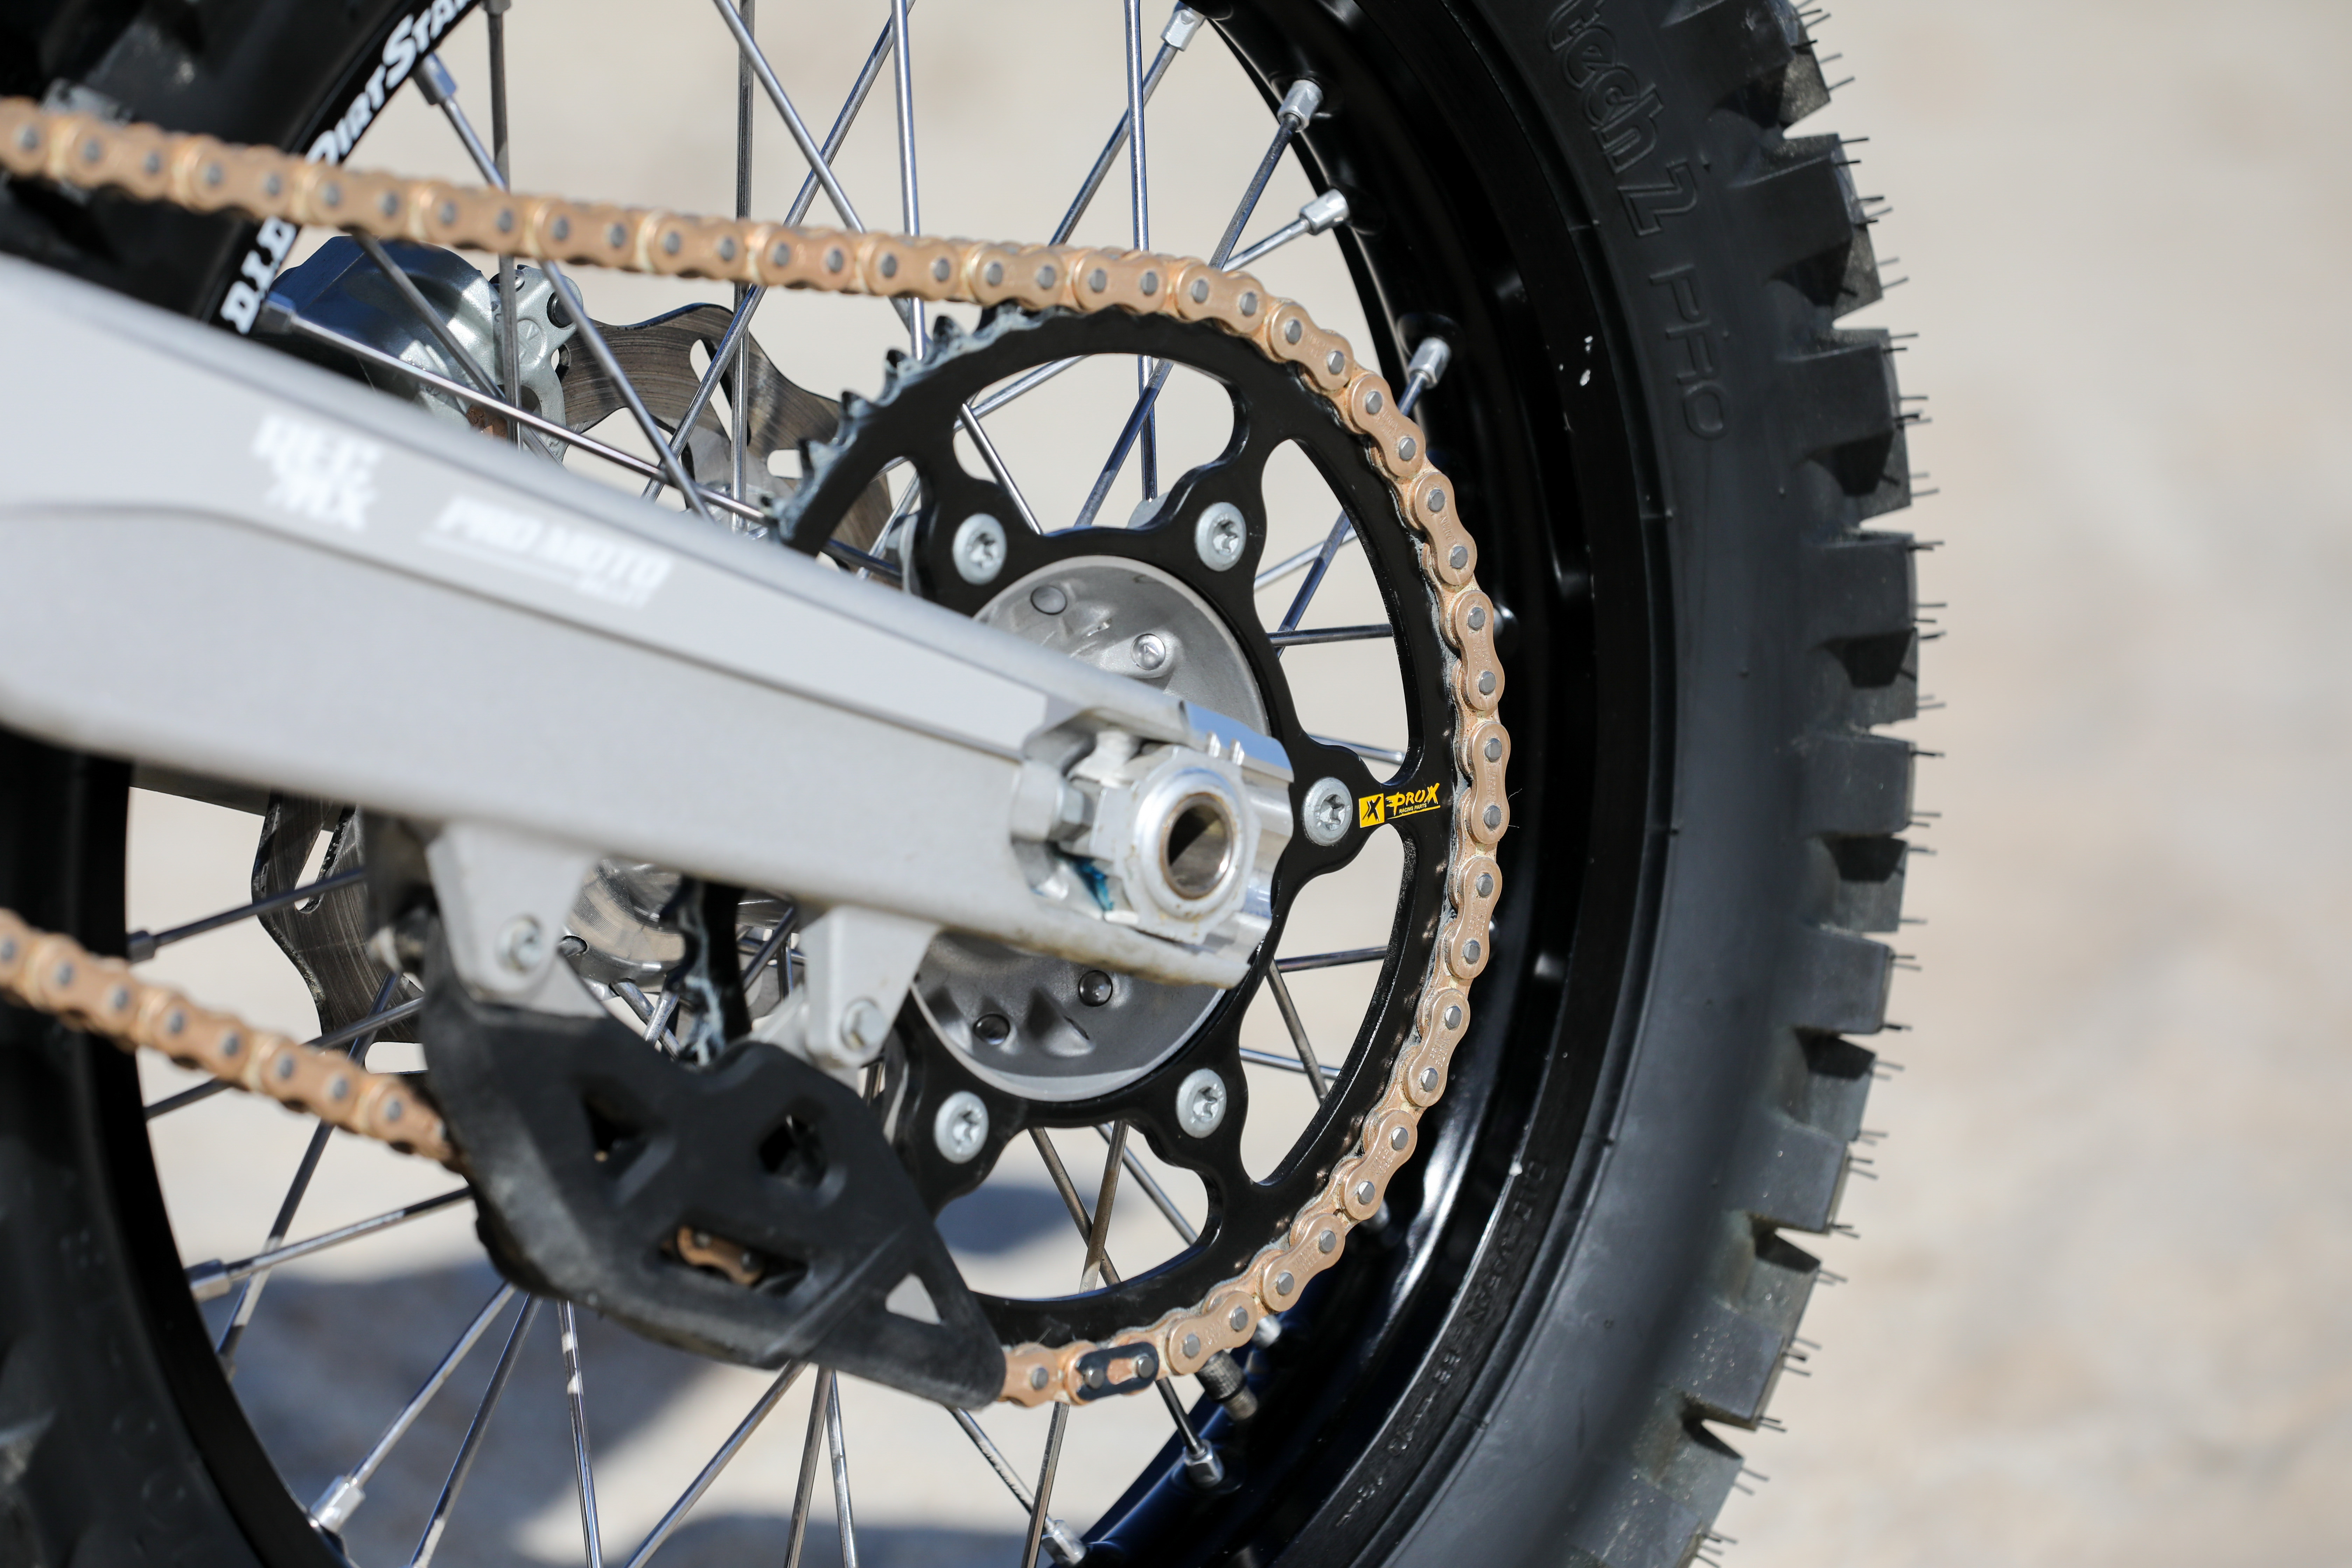 How To Replace the Countershaft Sprocket and Rear Sprocket on your Dirt Bike